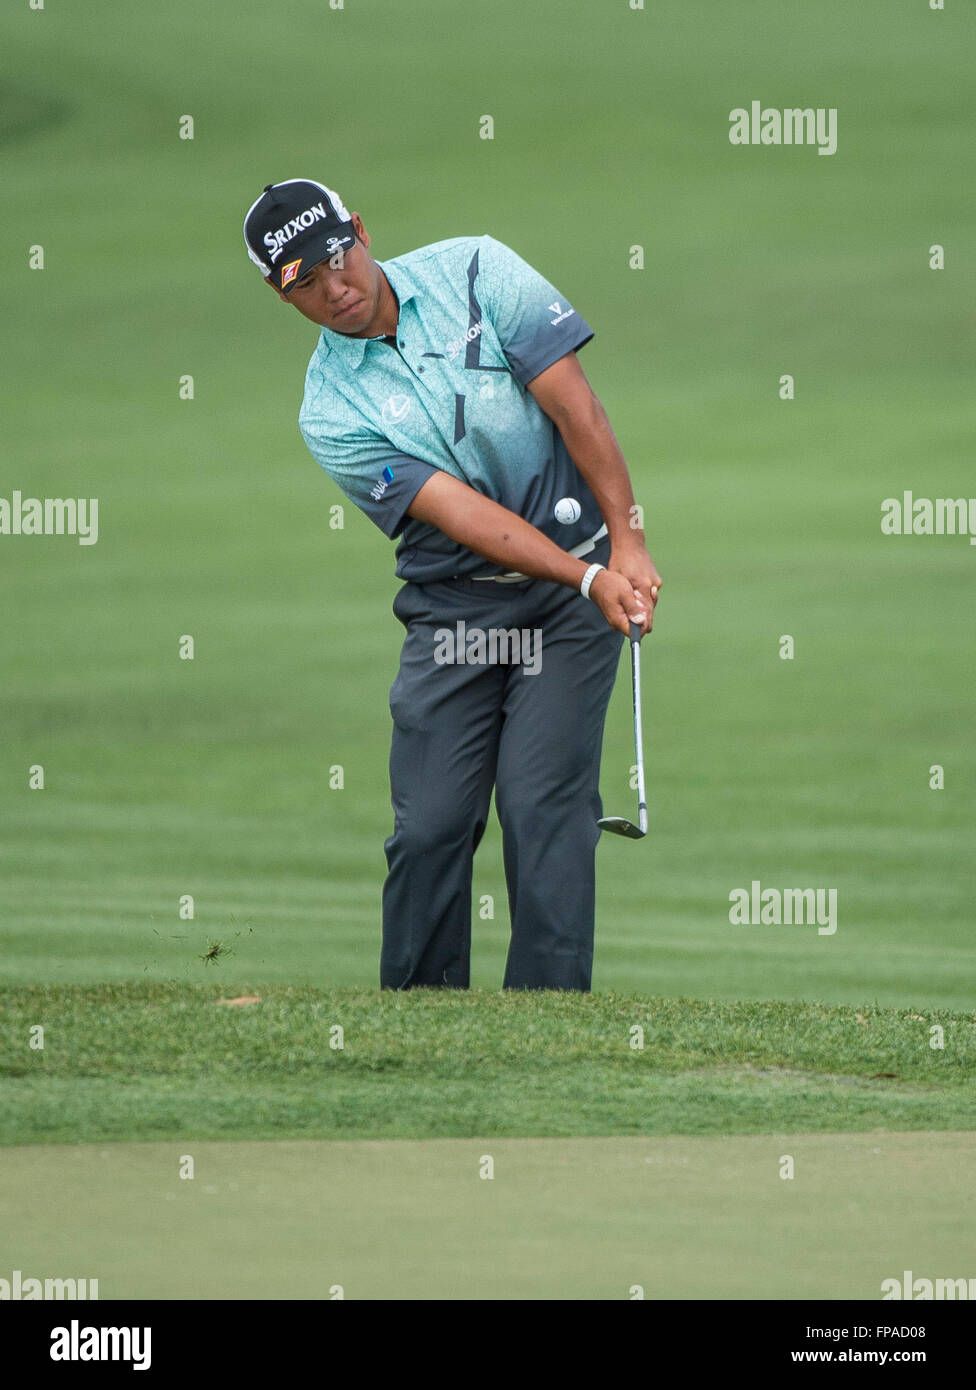 March 18, 2016 - Orlando, FL, U.S: Hideki Matsuyama of Japan chips up to the 6th green during second round golf action of the Arnold Palmer Invitational presented by MasterCard held at Arnold Palmer's Bay Hill Club & Lodge in Orlando, Fl. Romeo T Guzman/CSM. Stock Photo